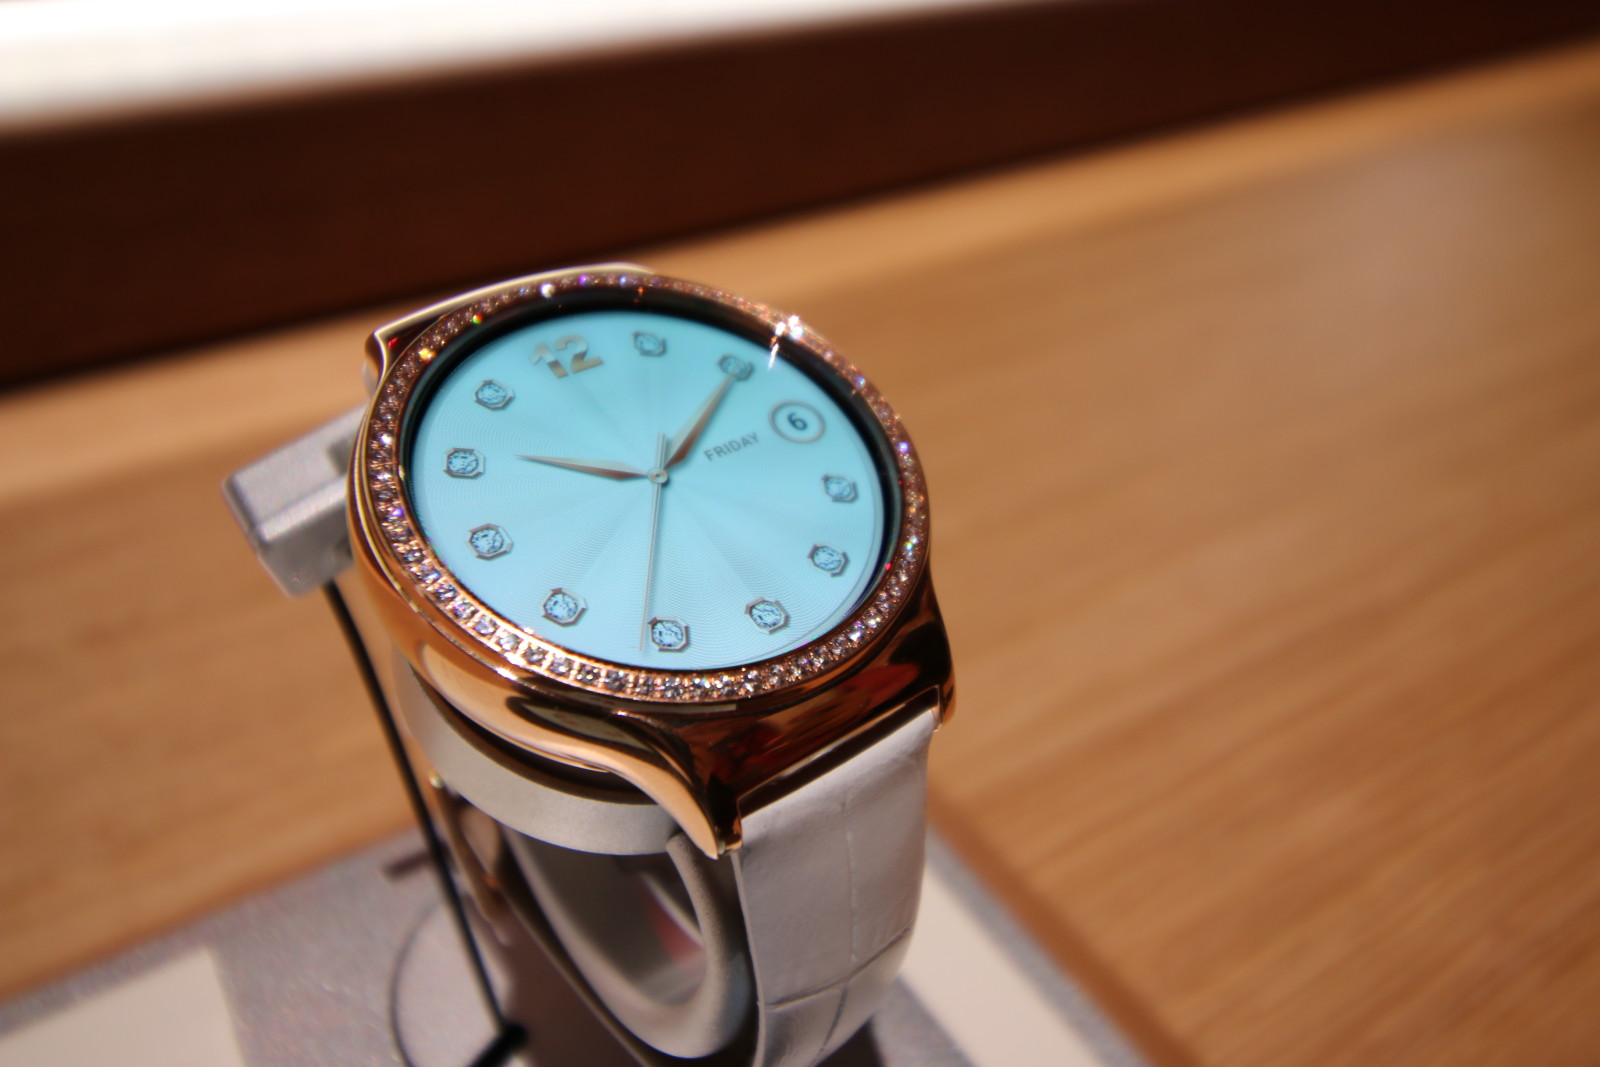 Huawei Watch Jewel and Elegant are now available in the US â Phandroid